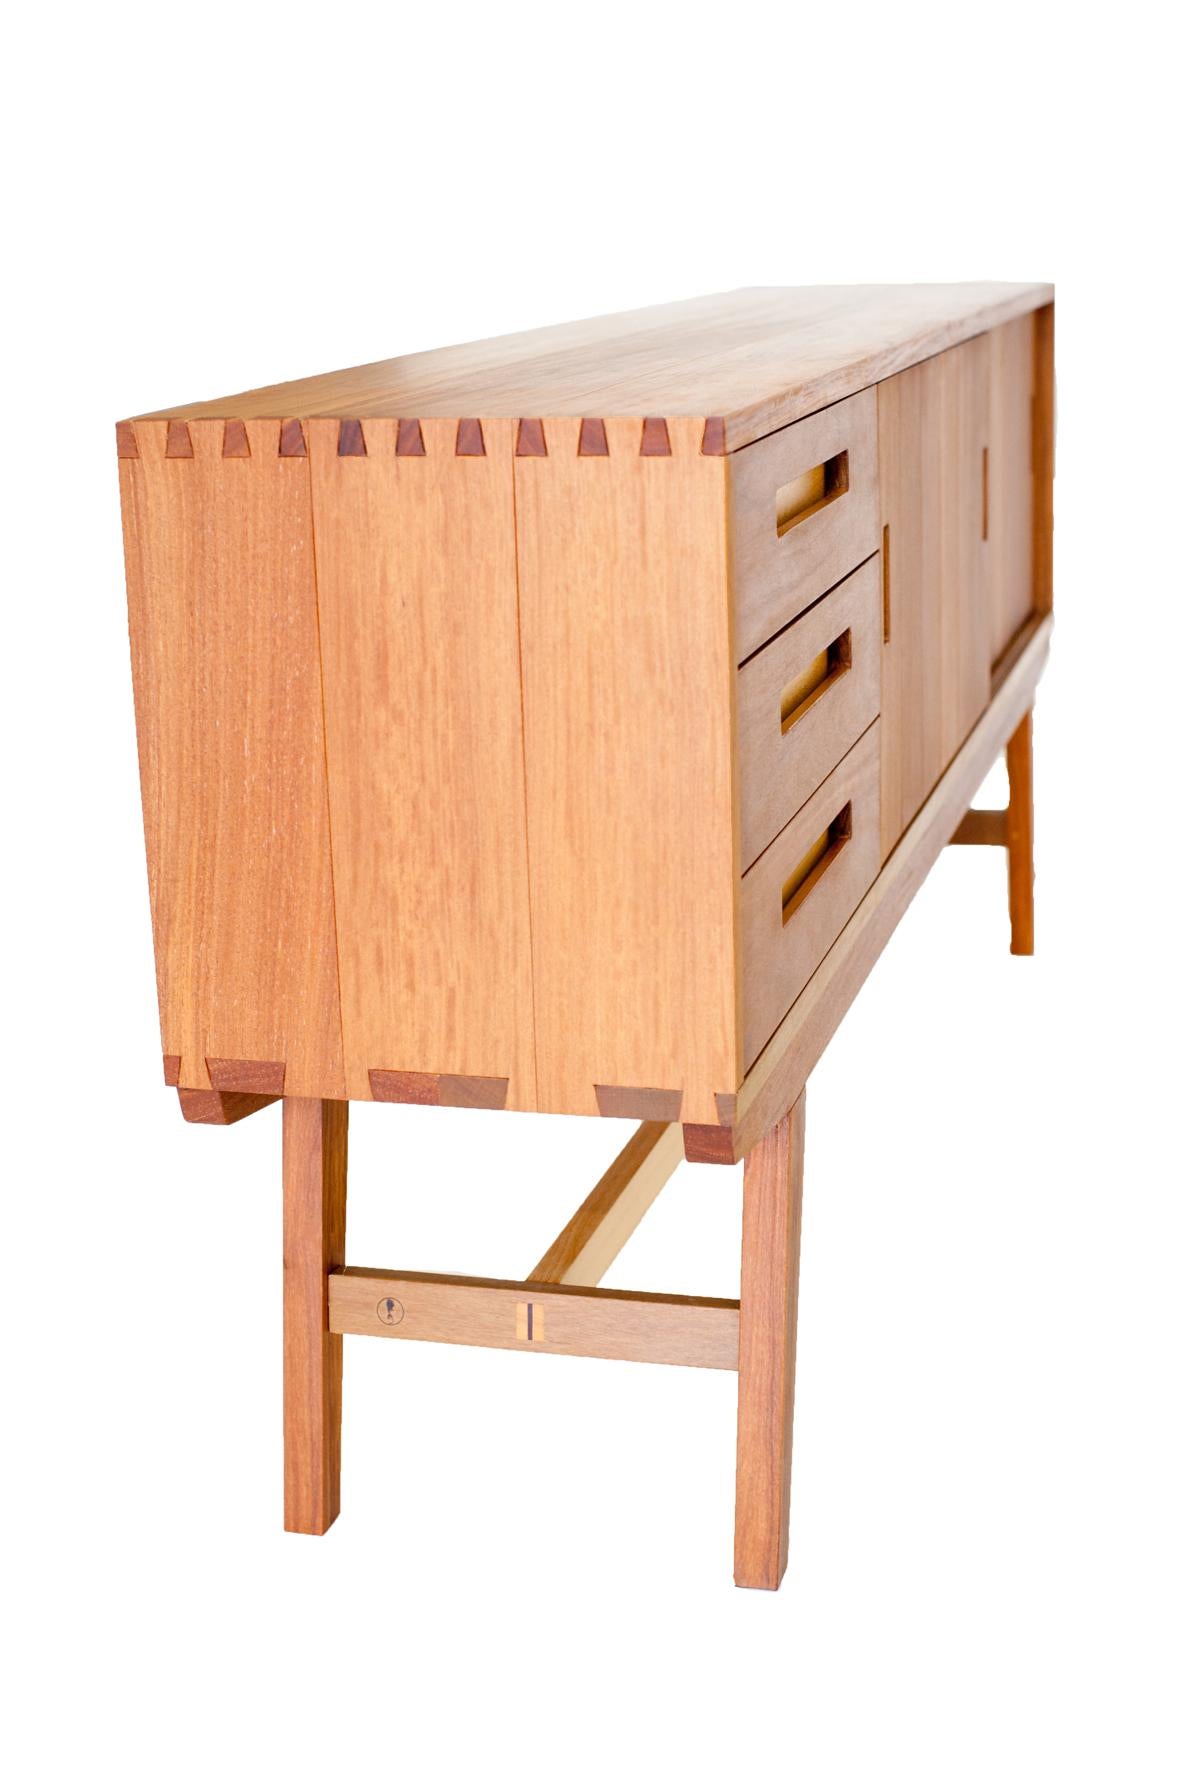 Contemporary Credenza Buffet by Ricardo Graham Ferreira Handcrafted in Brazilian Hardwood For Sale